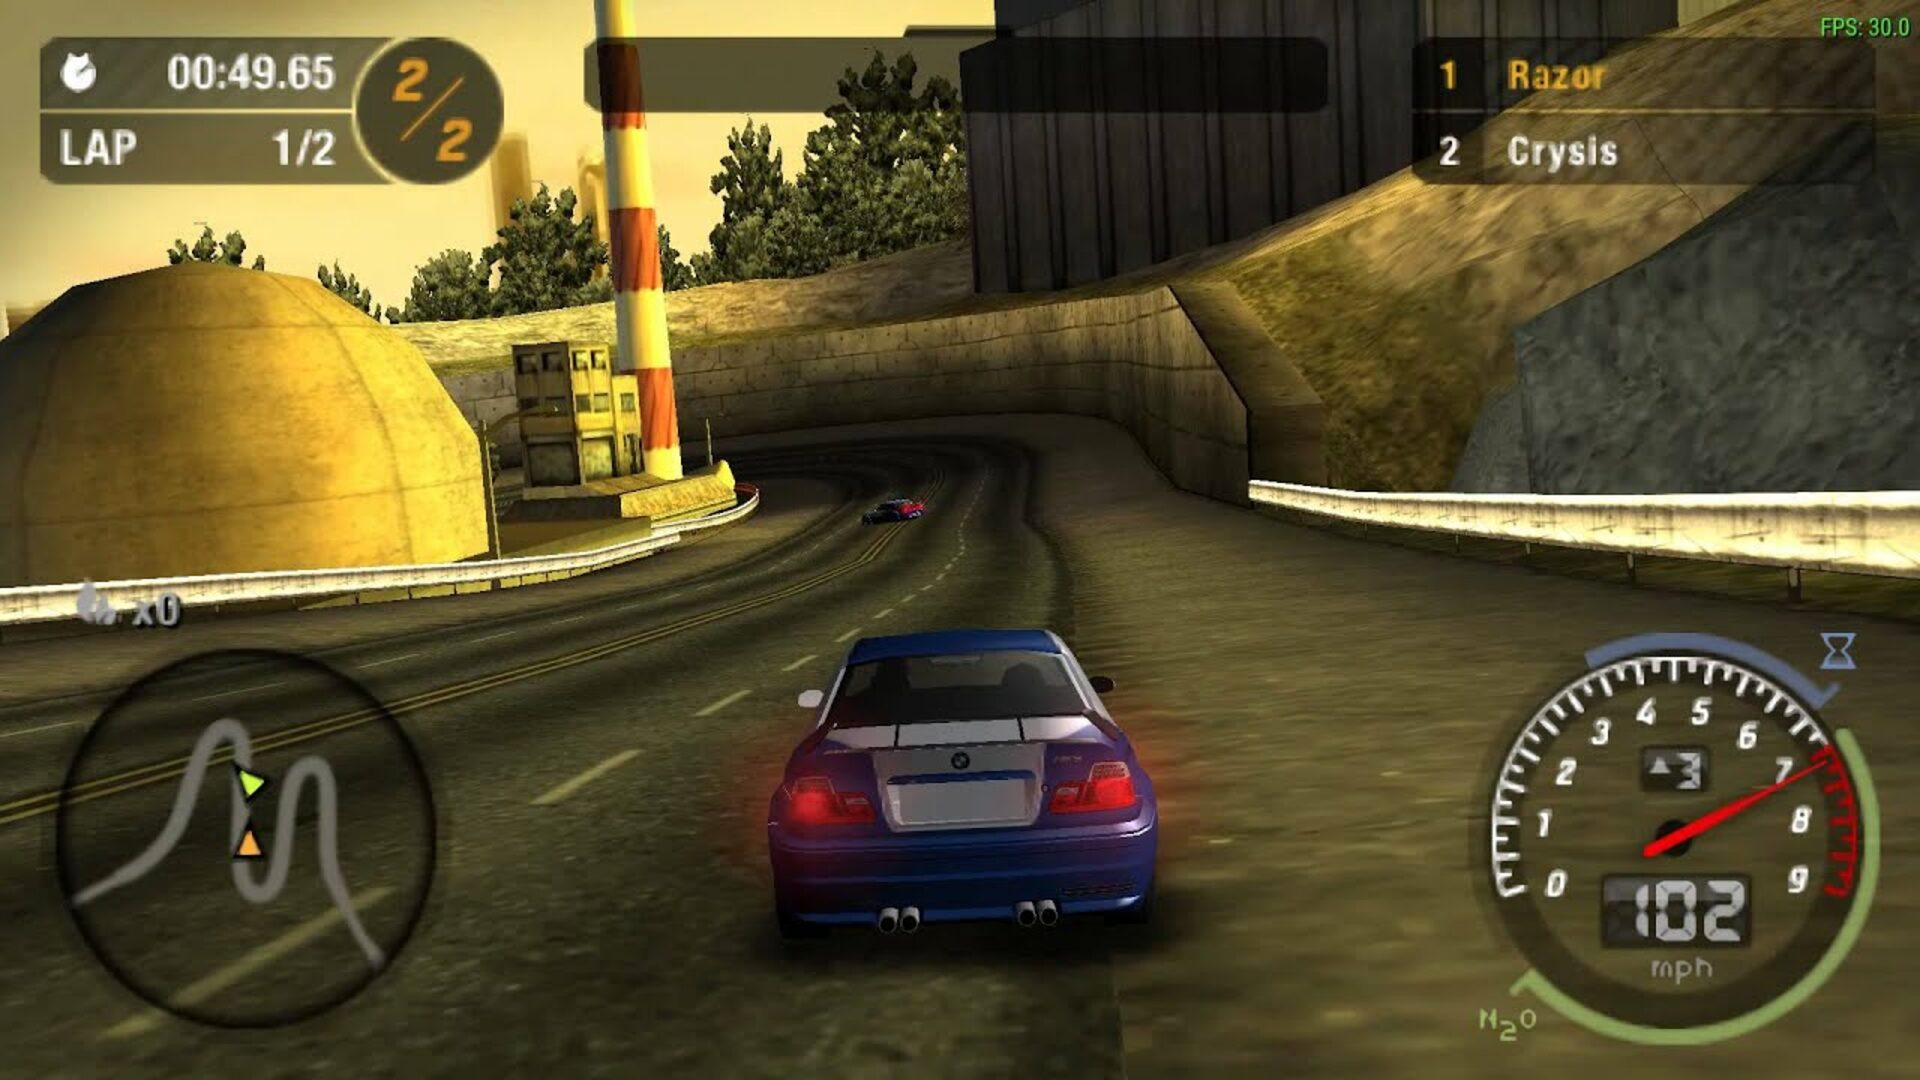 Domina Need for Speed: Most Wanted 5-1-0 PSP kaina? Pirk pigiau | ENEBA